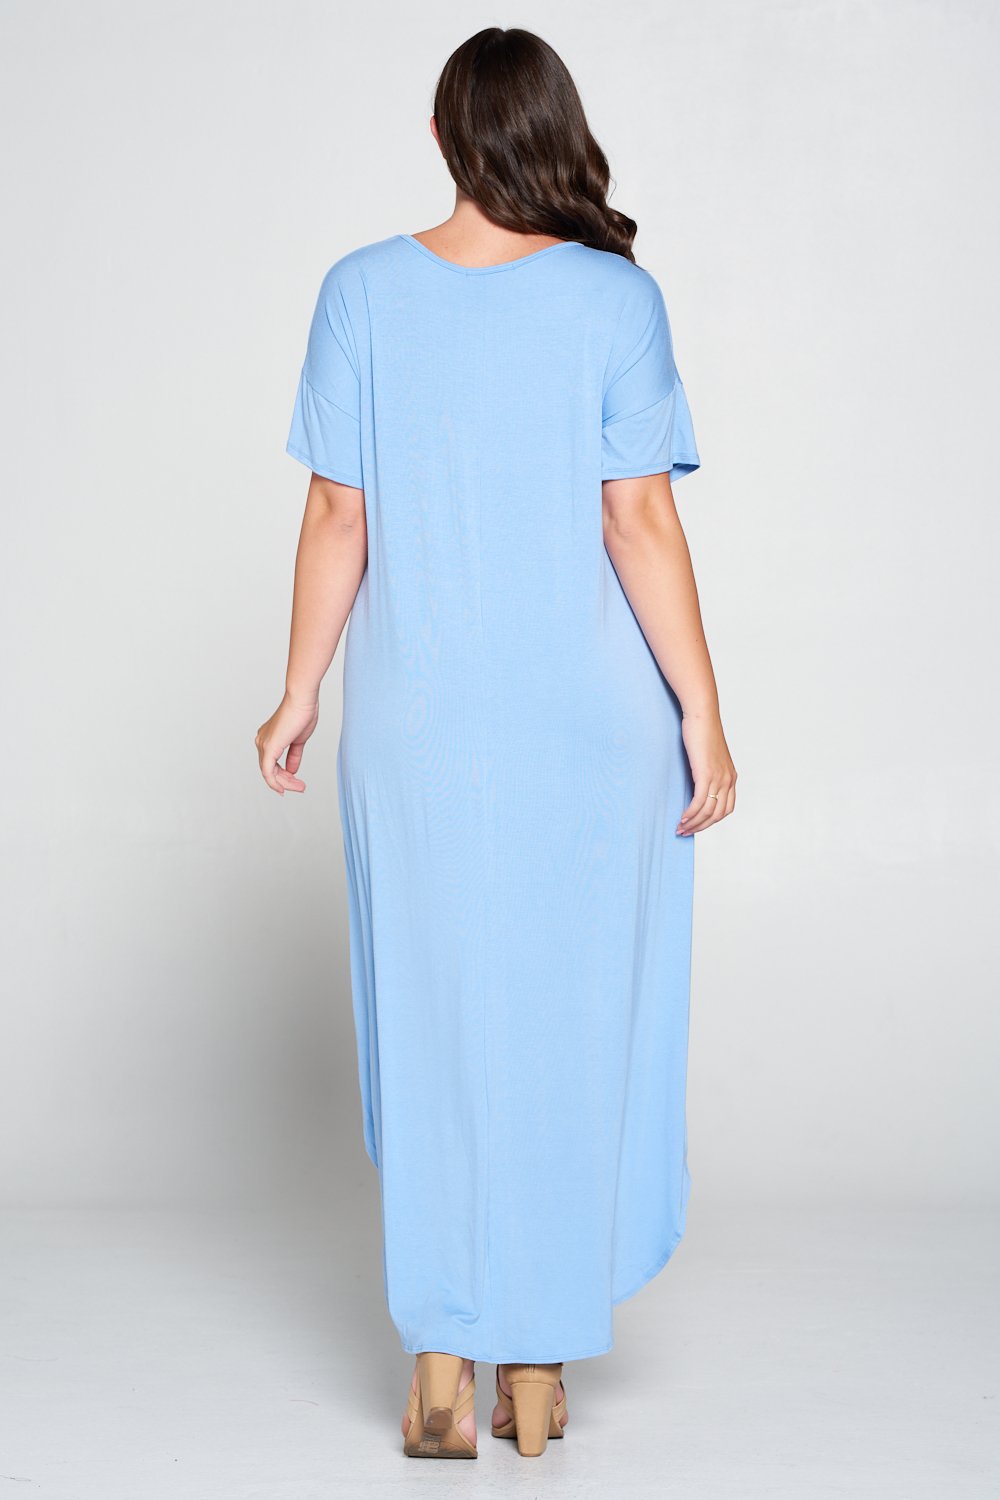 livd L I V D women's contemporary plus size clothing high low hi lo dress with pockets v neck sleeves in serenity light blue